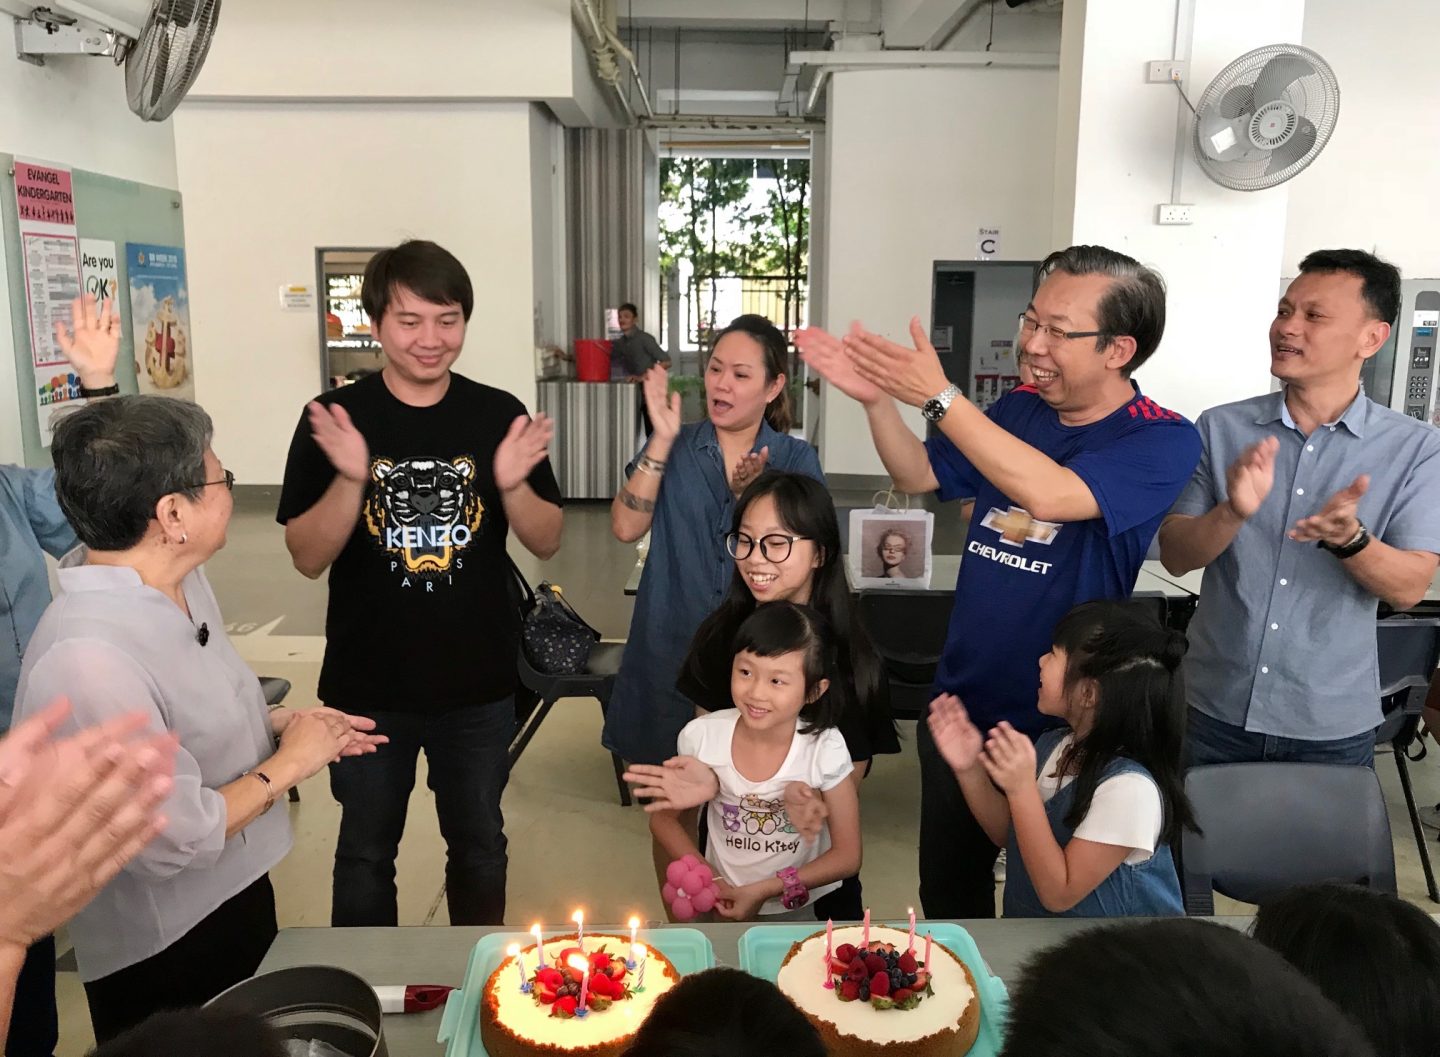 Birthdays are a big deal in the group – the cakes are usually homemade. Pastor Joshua shares that for some members, it is the first time their birthdays are celebrated. 